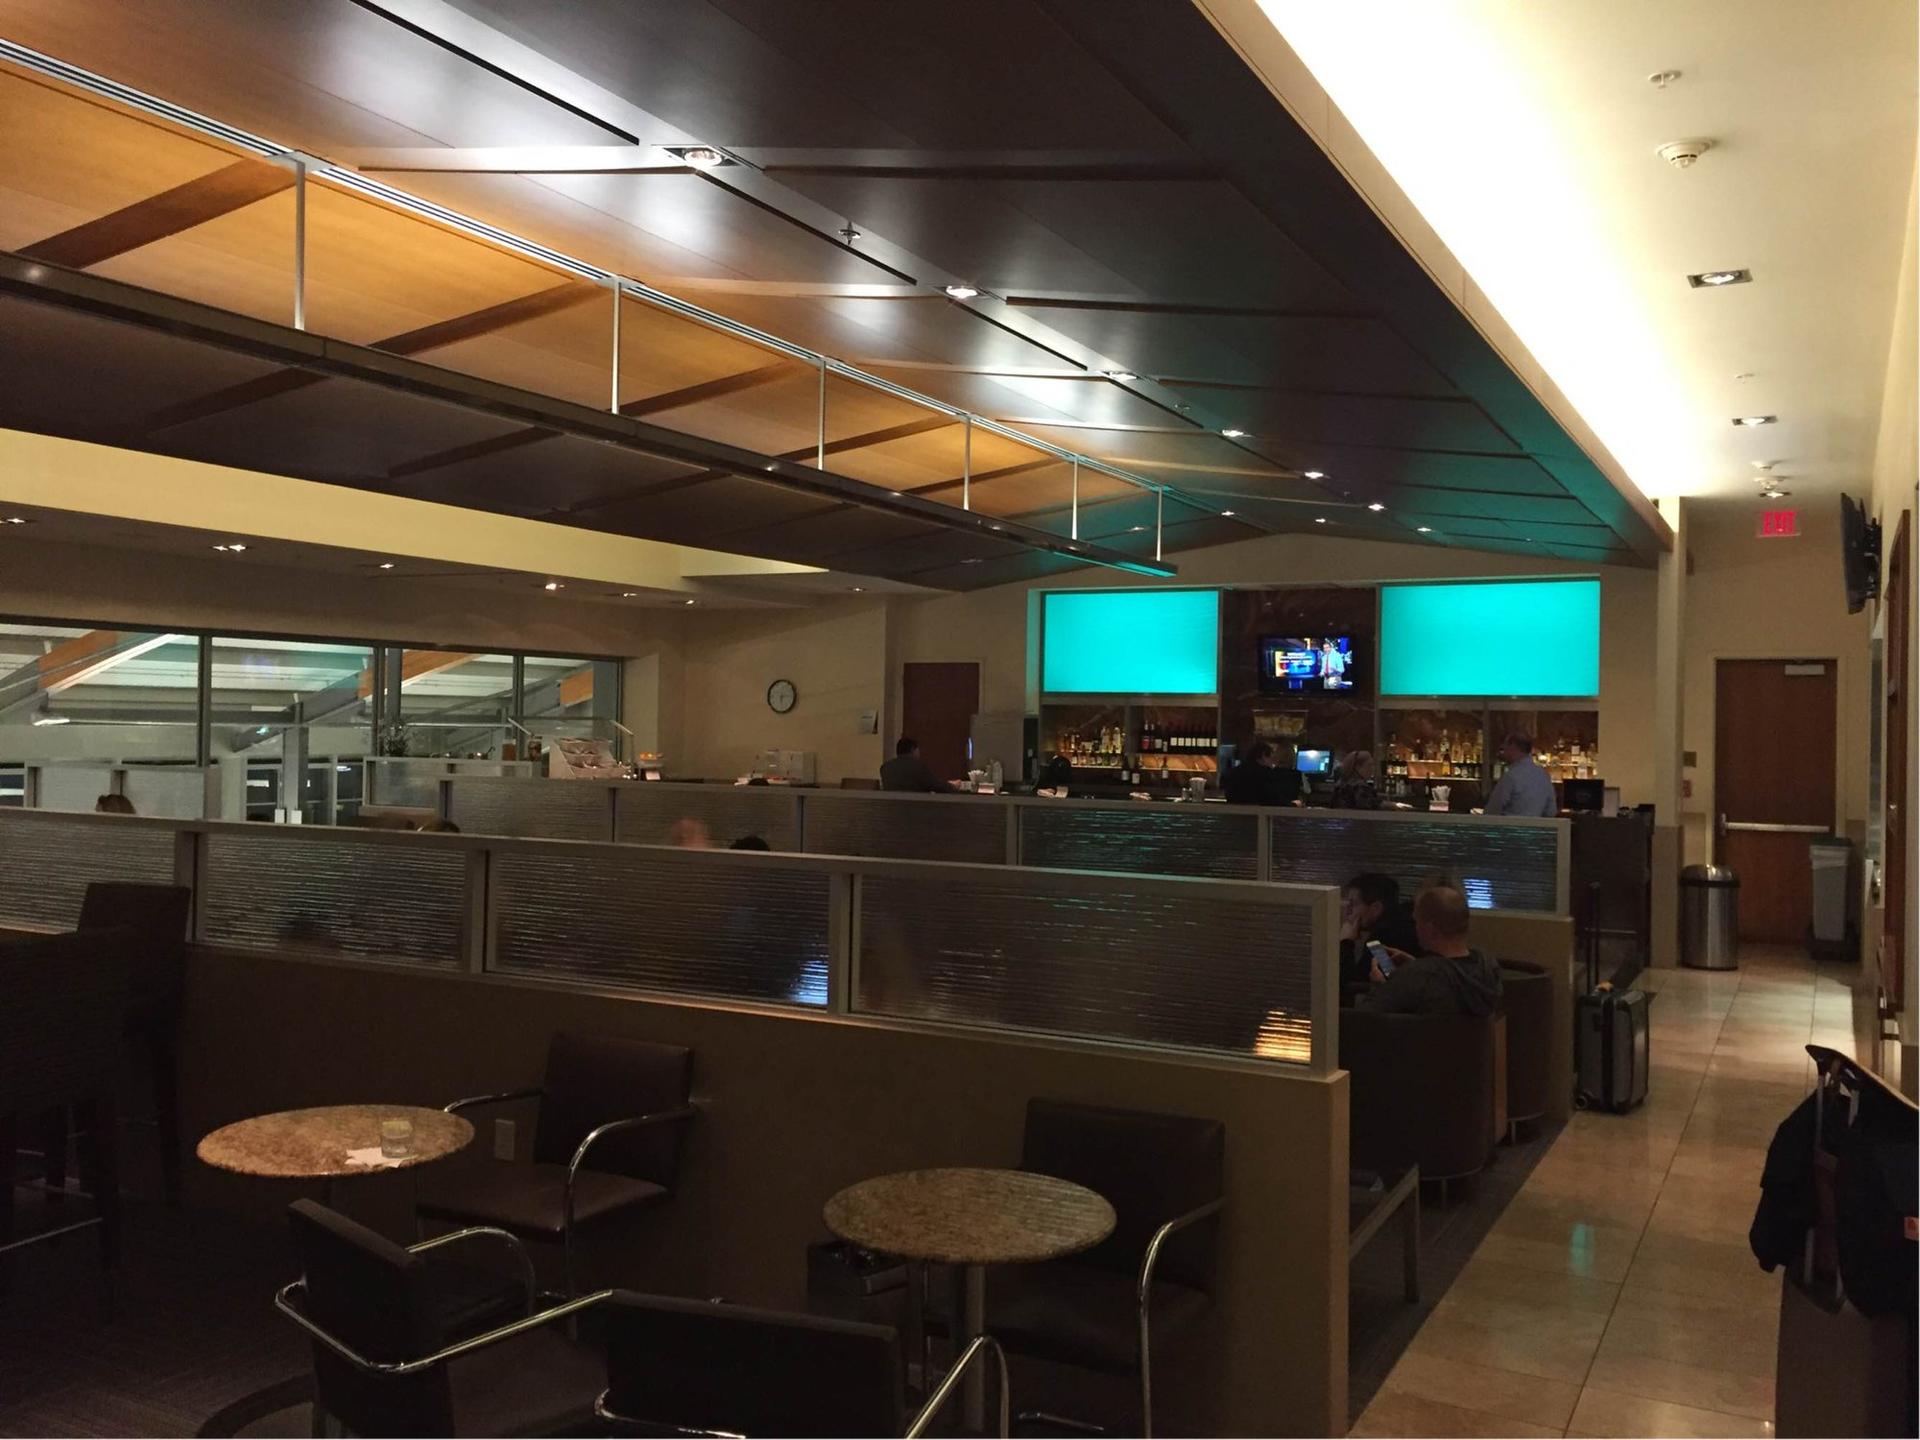 American Airlines Admirals Club image 27 of 31